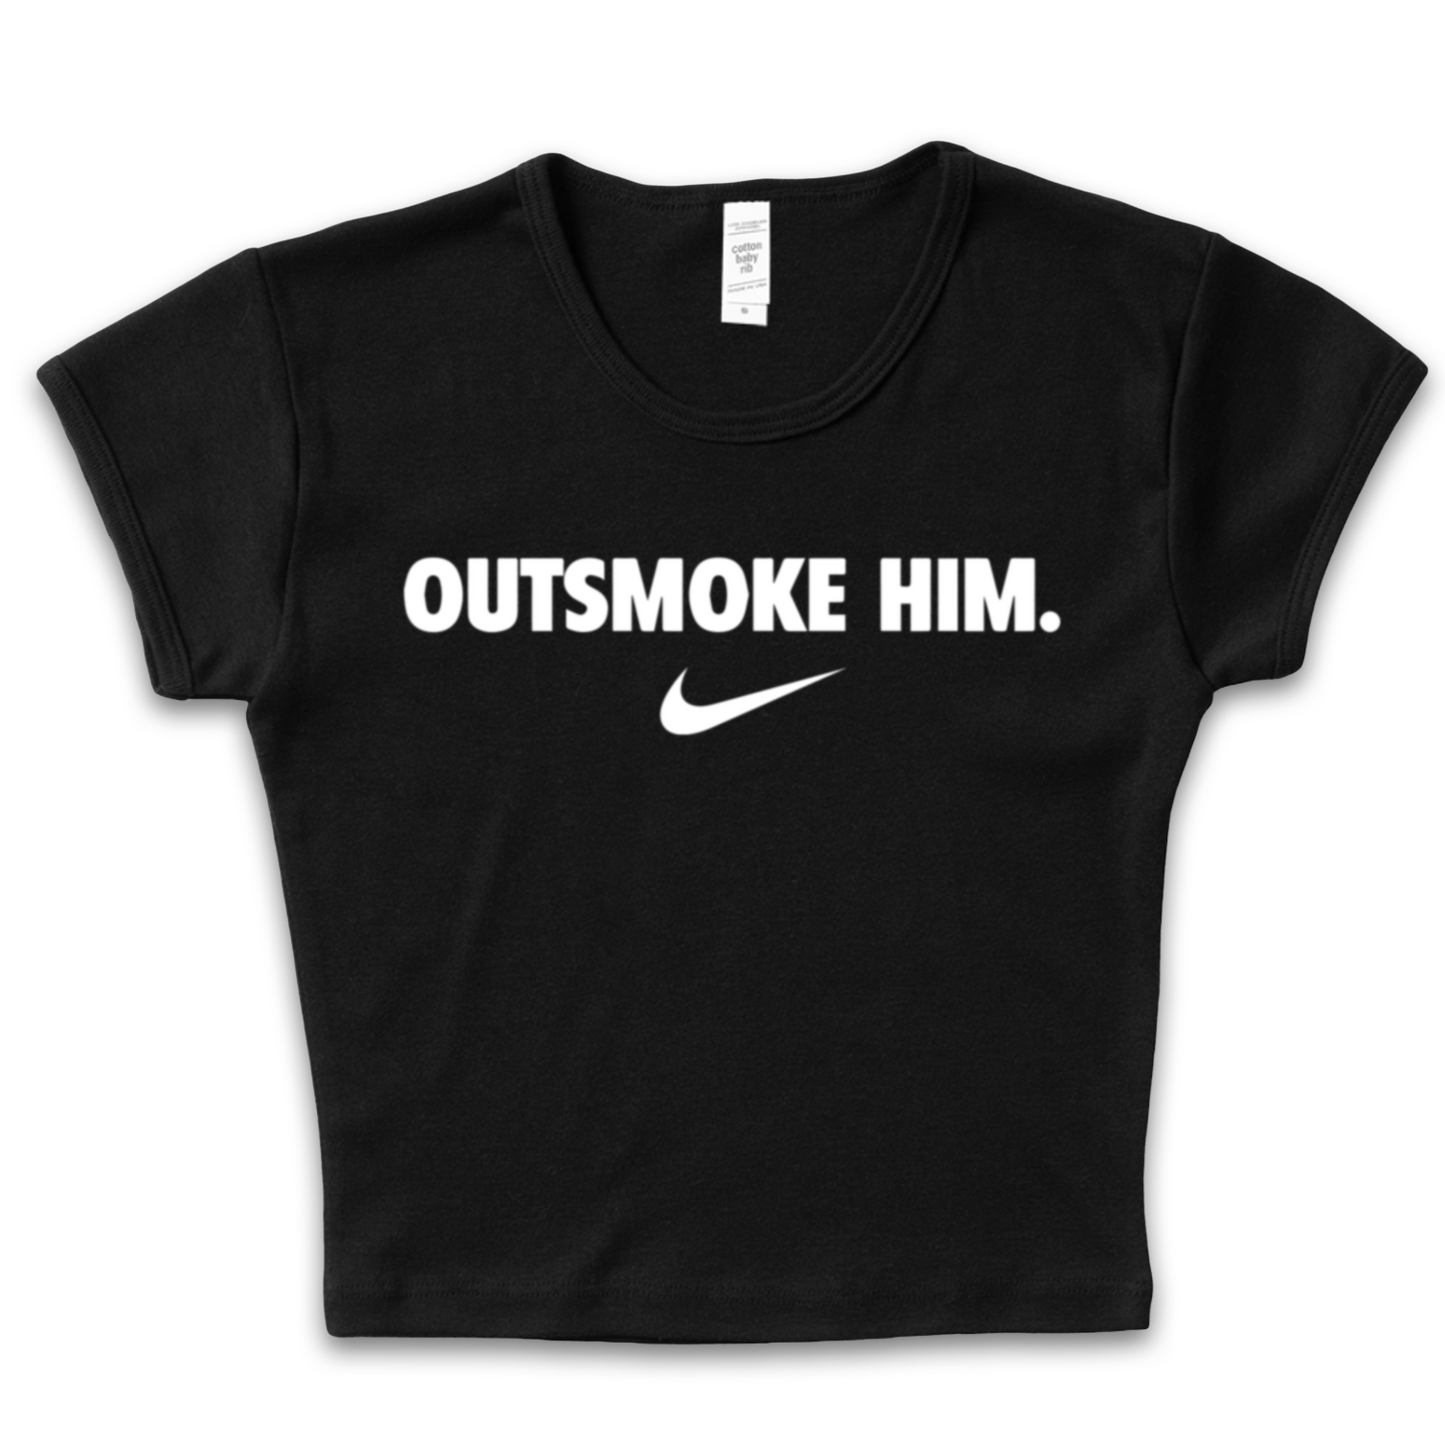 Outsmoke Him Baby Tee